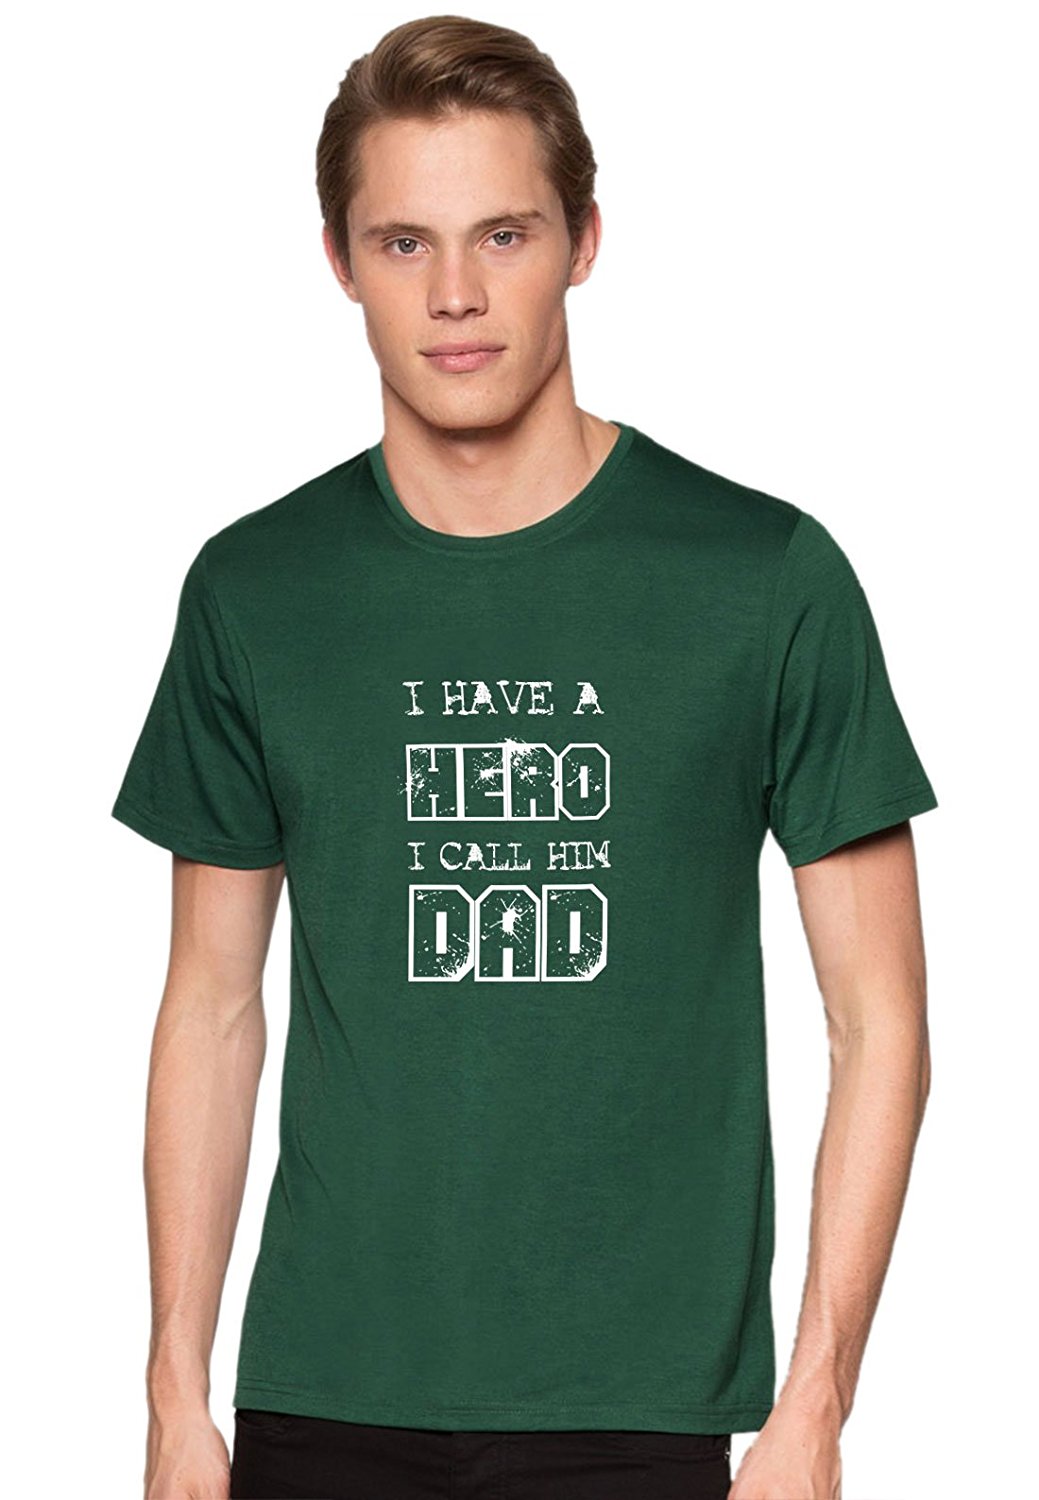 DOUBLE F ROUND NECK HALF SLEEVE HERO DAD WITH 05 COLORS PRINTED T-SHIRT FOR MEN